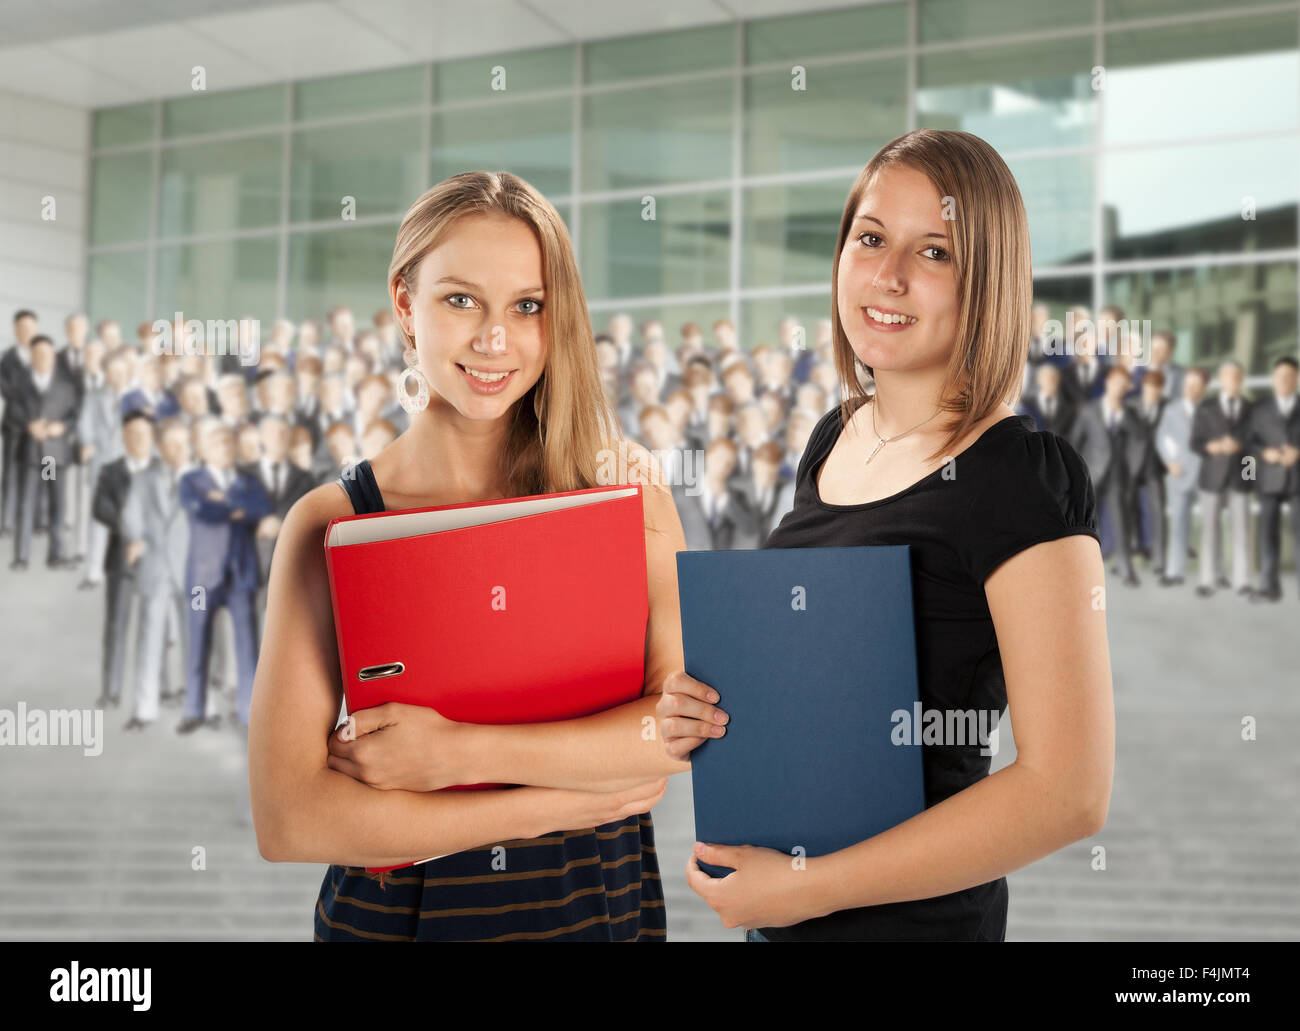 Two young employees are faced with a group of colleagues. Stock Photo